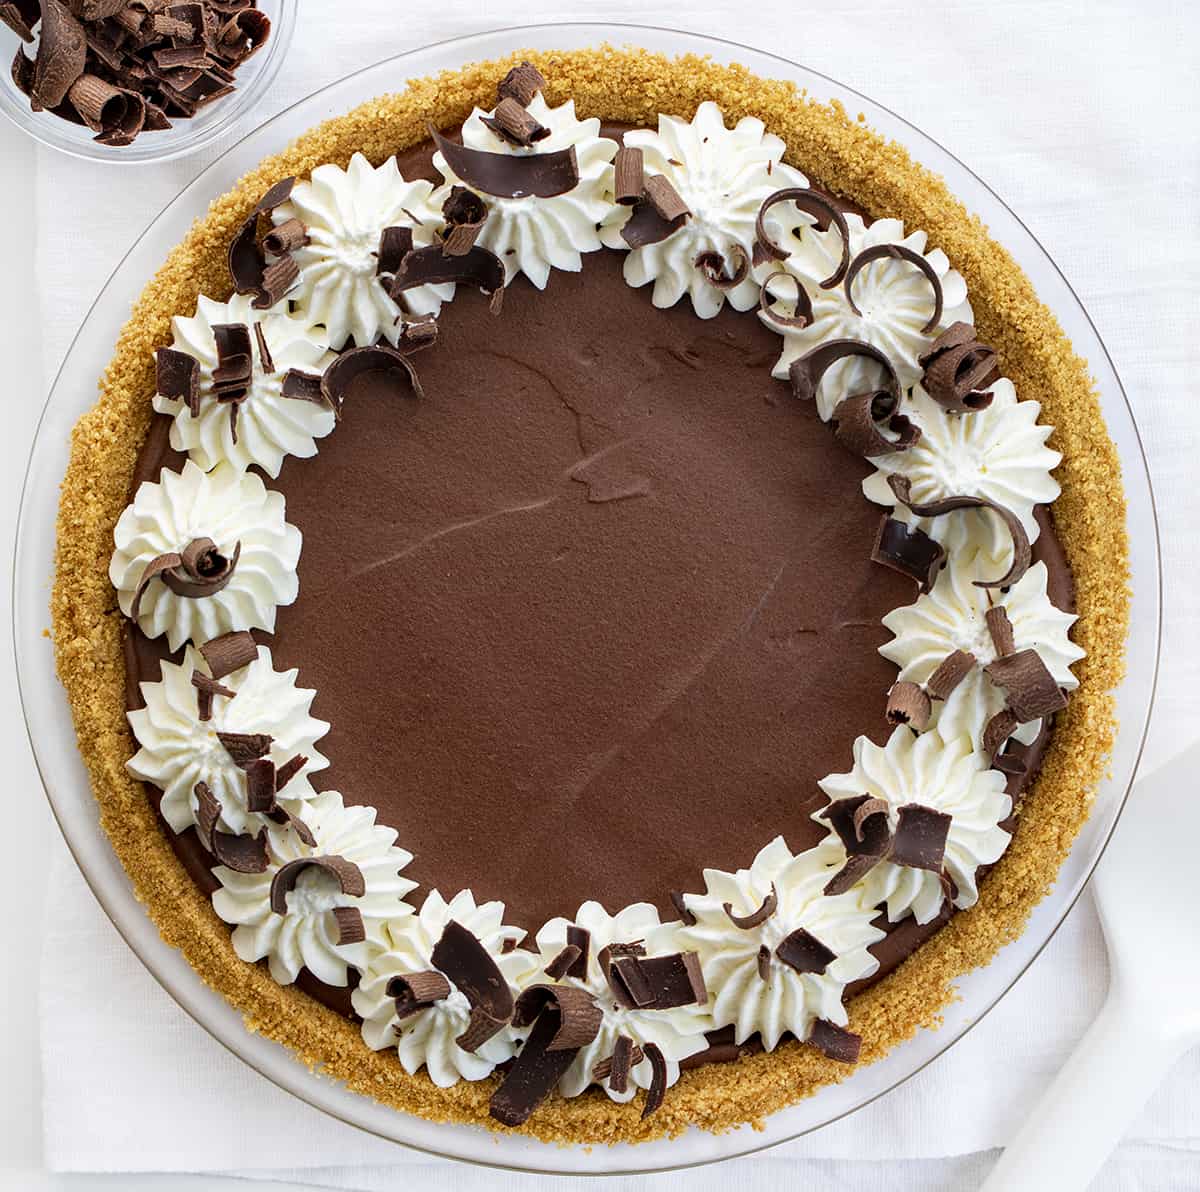 Overhead of a Chocolate Icebox Pie with Whipped Cream and Chocolate Curls. Dessert, Pie, No Bake Pie, Chocolate Desserts, no Bake Chocolate Desserts, Summer Dessert, Dark Chocolate Dessert, What to Serve to Company for Dessert, recipes, chocolate, chocolate curls, Whipped Cream, i am baker, iambaker.